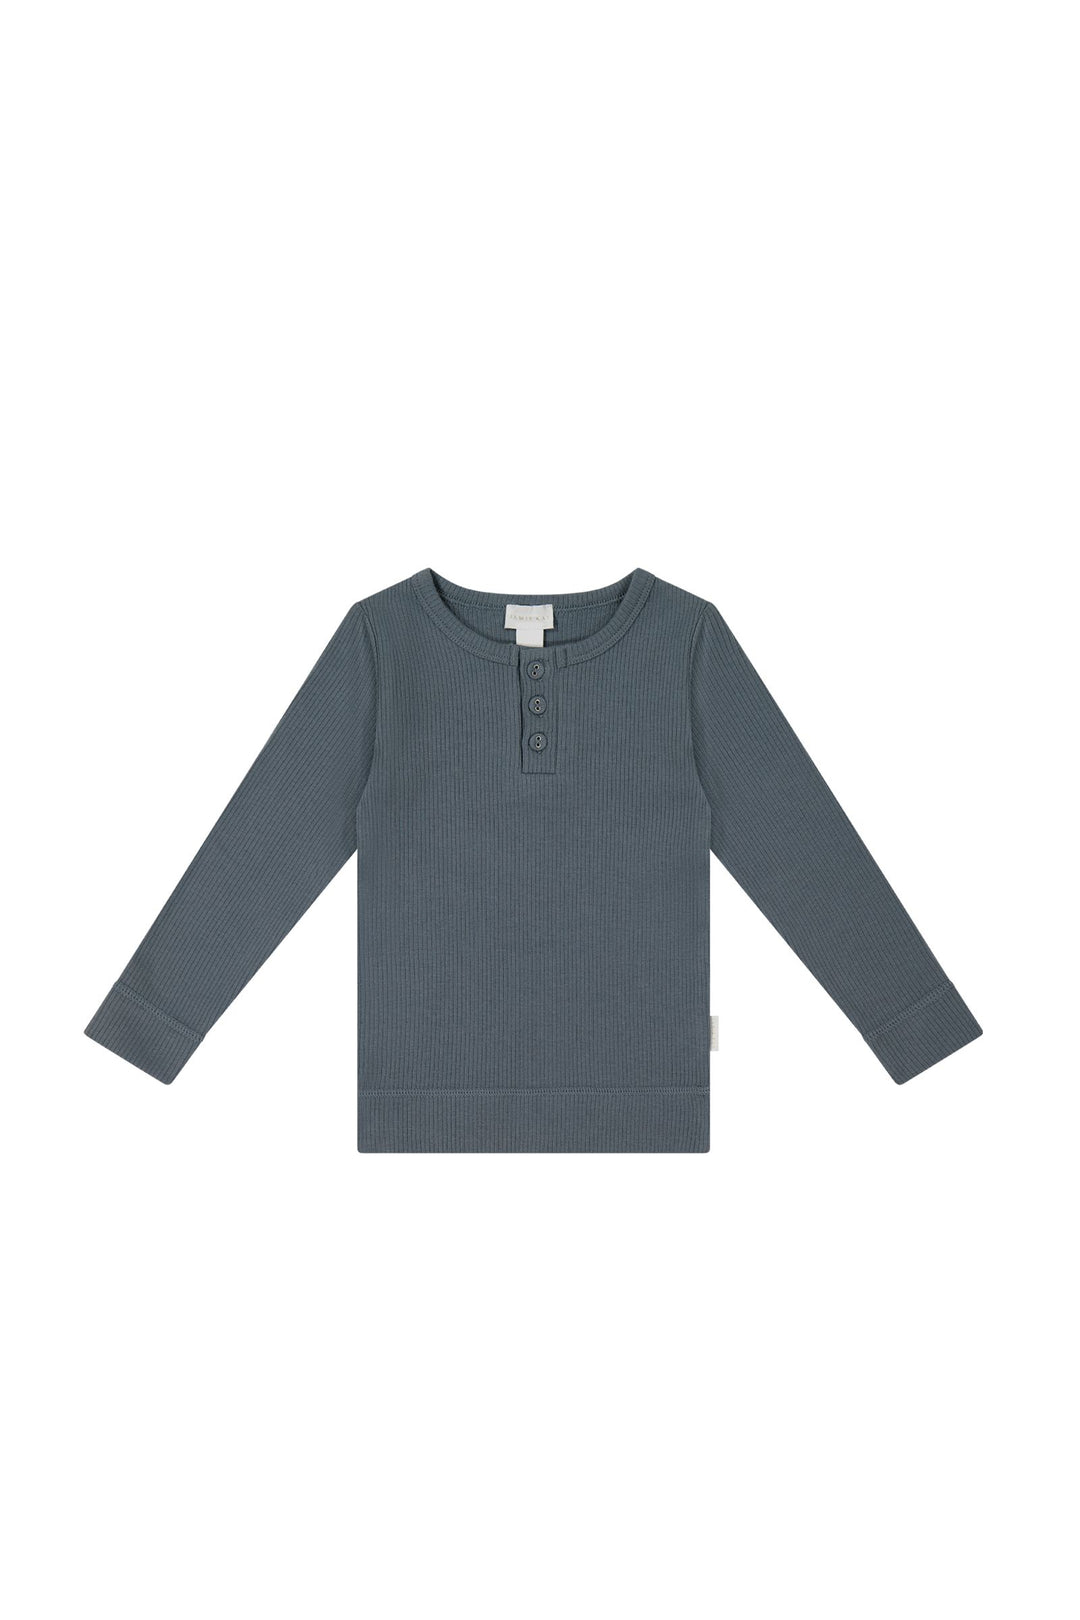 Long sleeved top- stormy night - JL & CO. boutique 